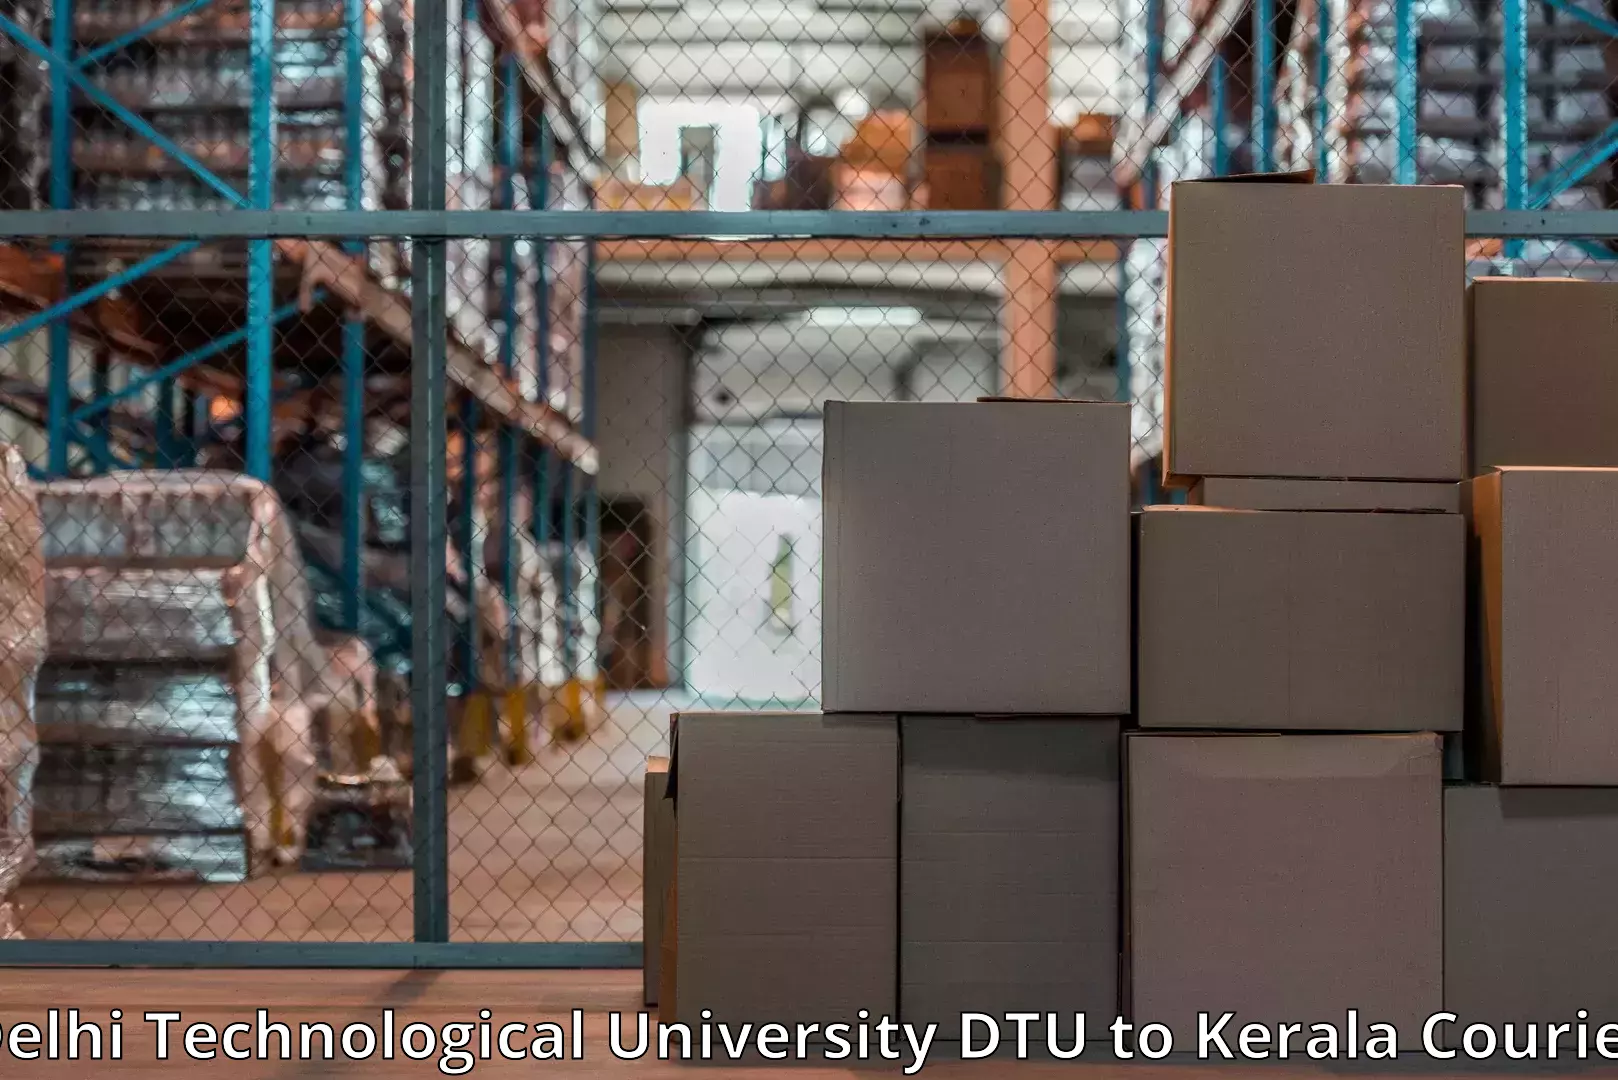 Packing and moving services in Delhi Technological University DTU to Cherpulassery